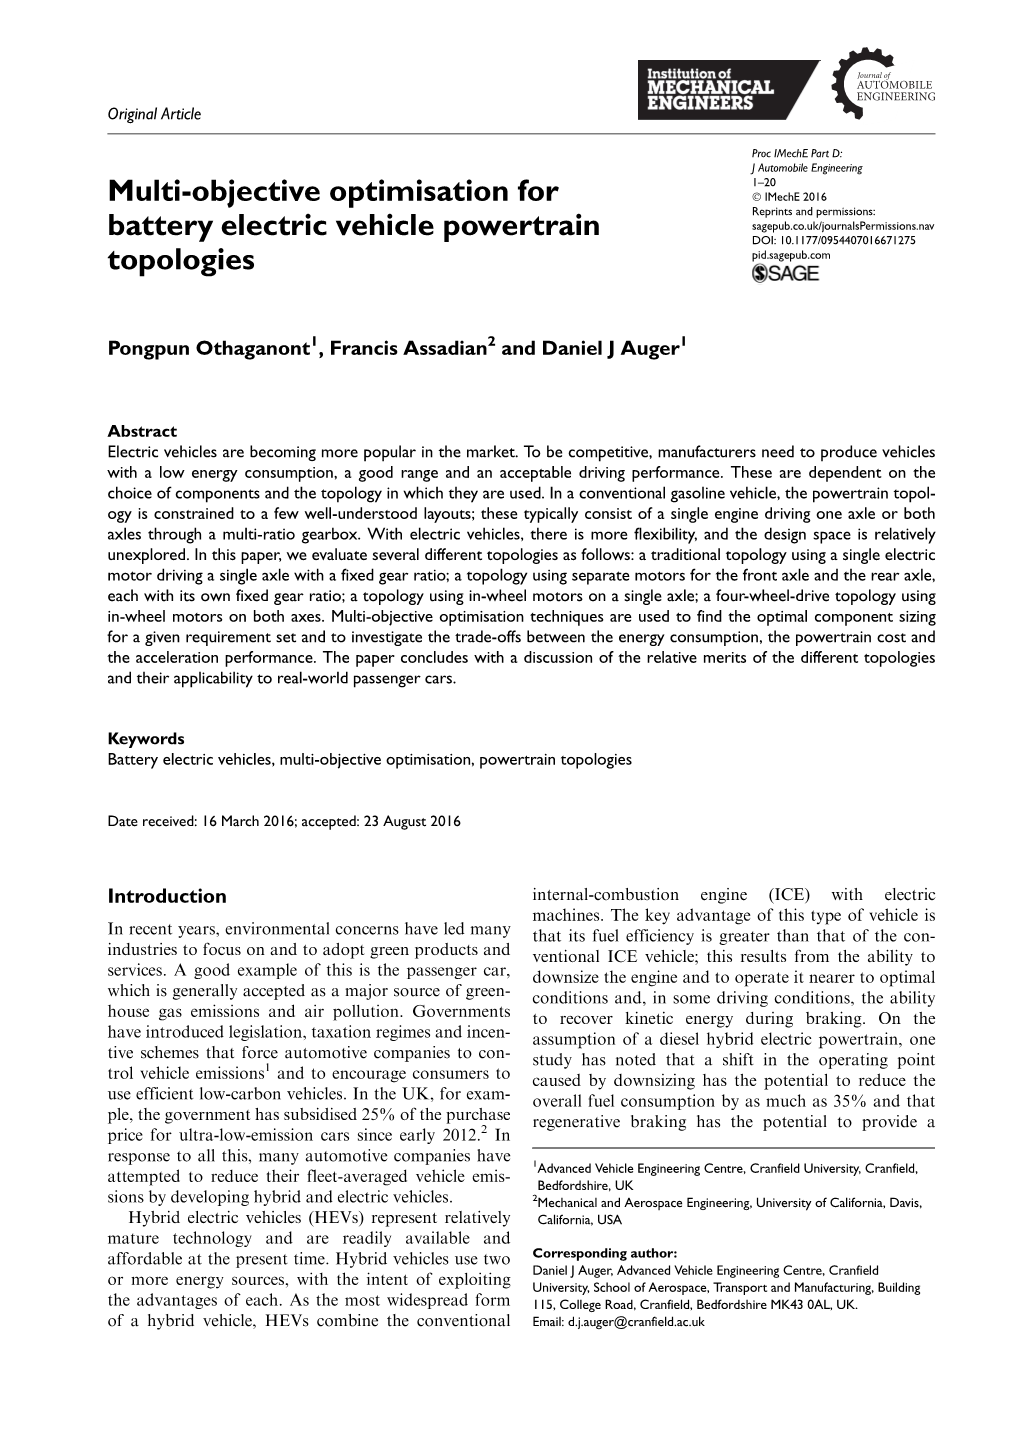 Multi-Objective Optimisation for Battery Electric Vehicle Powertrain Topologies